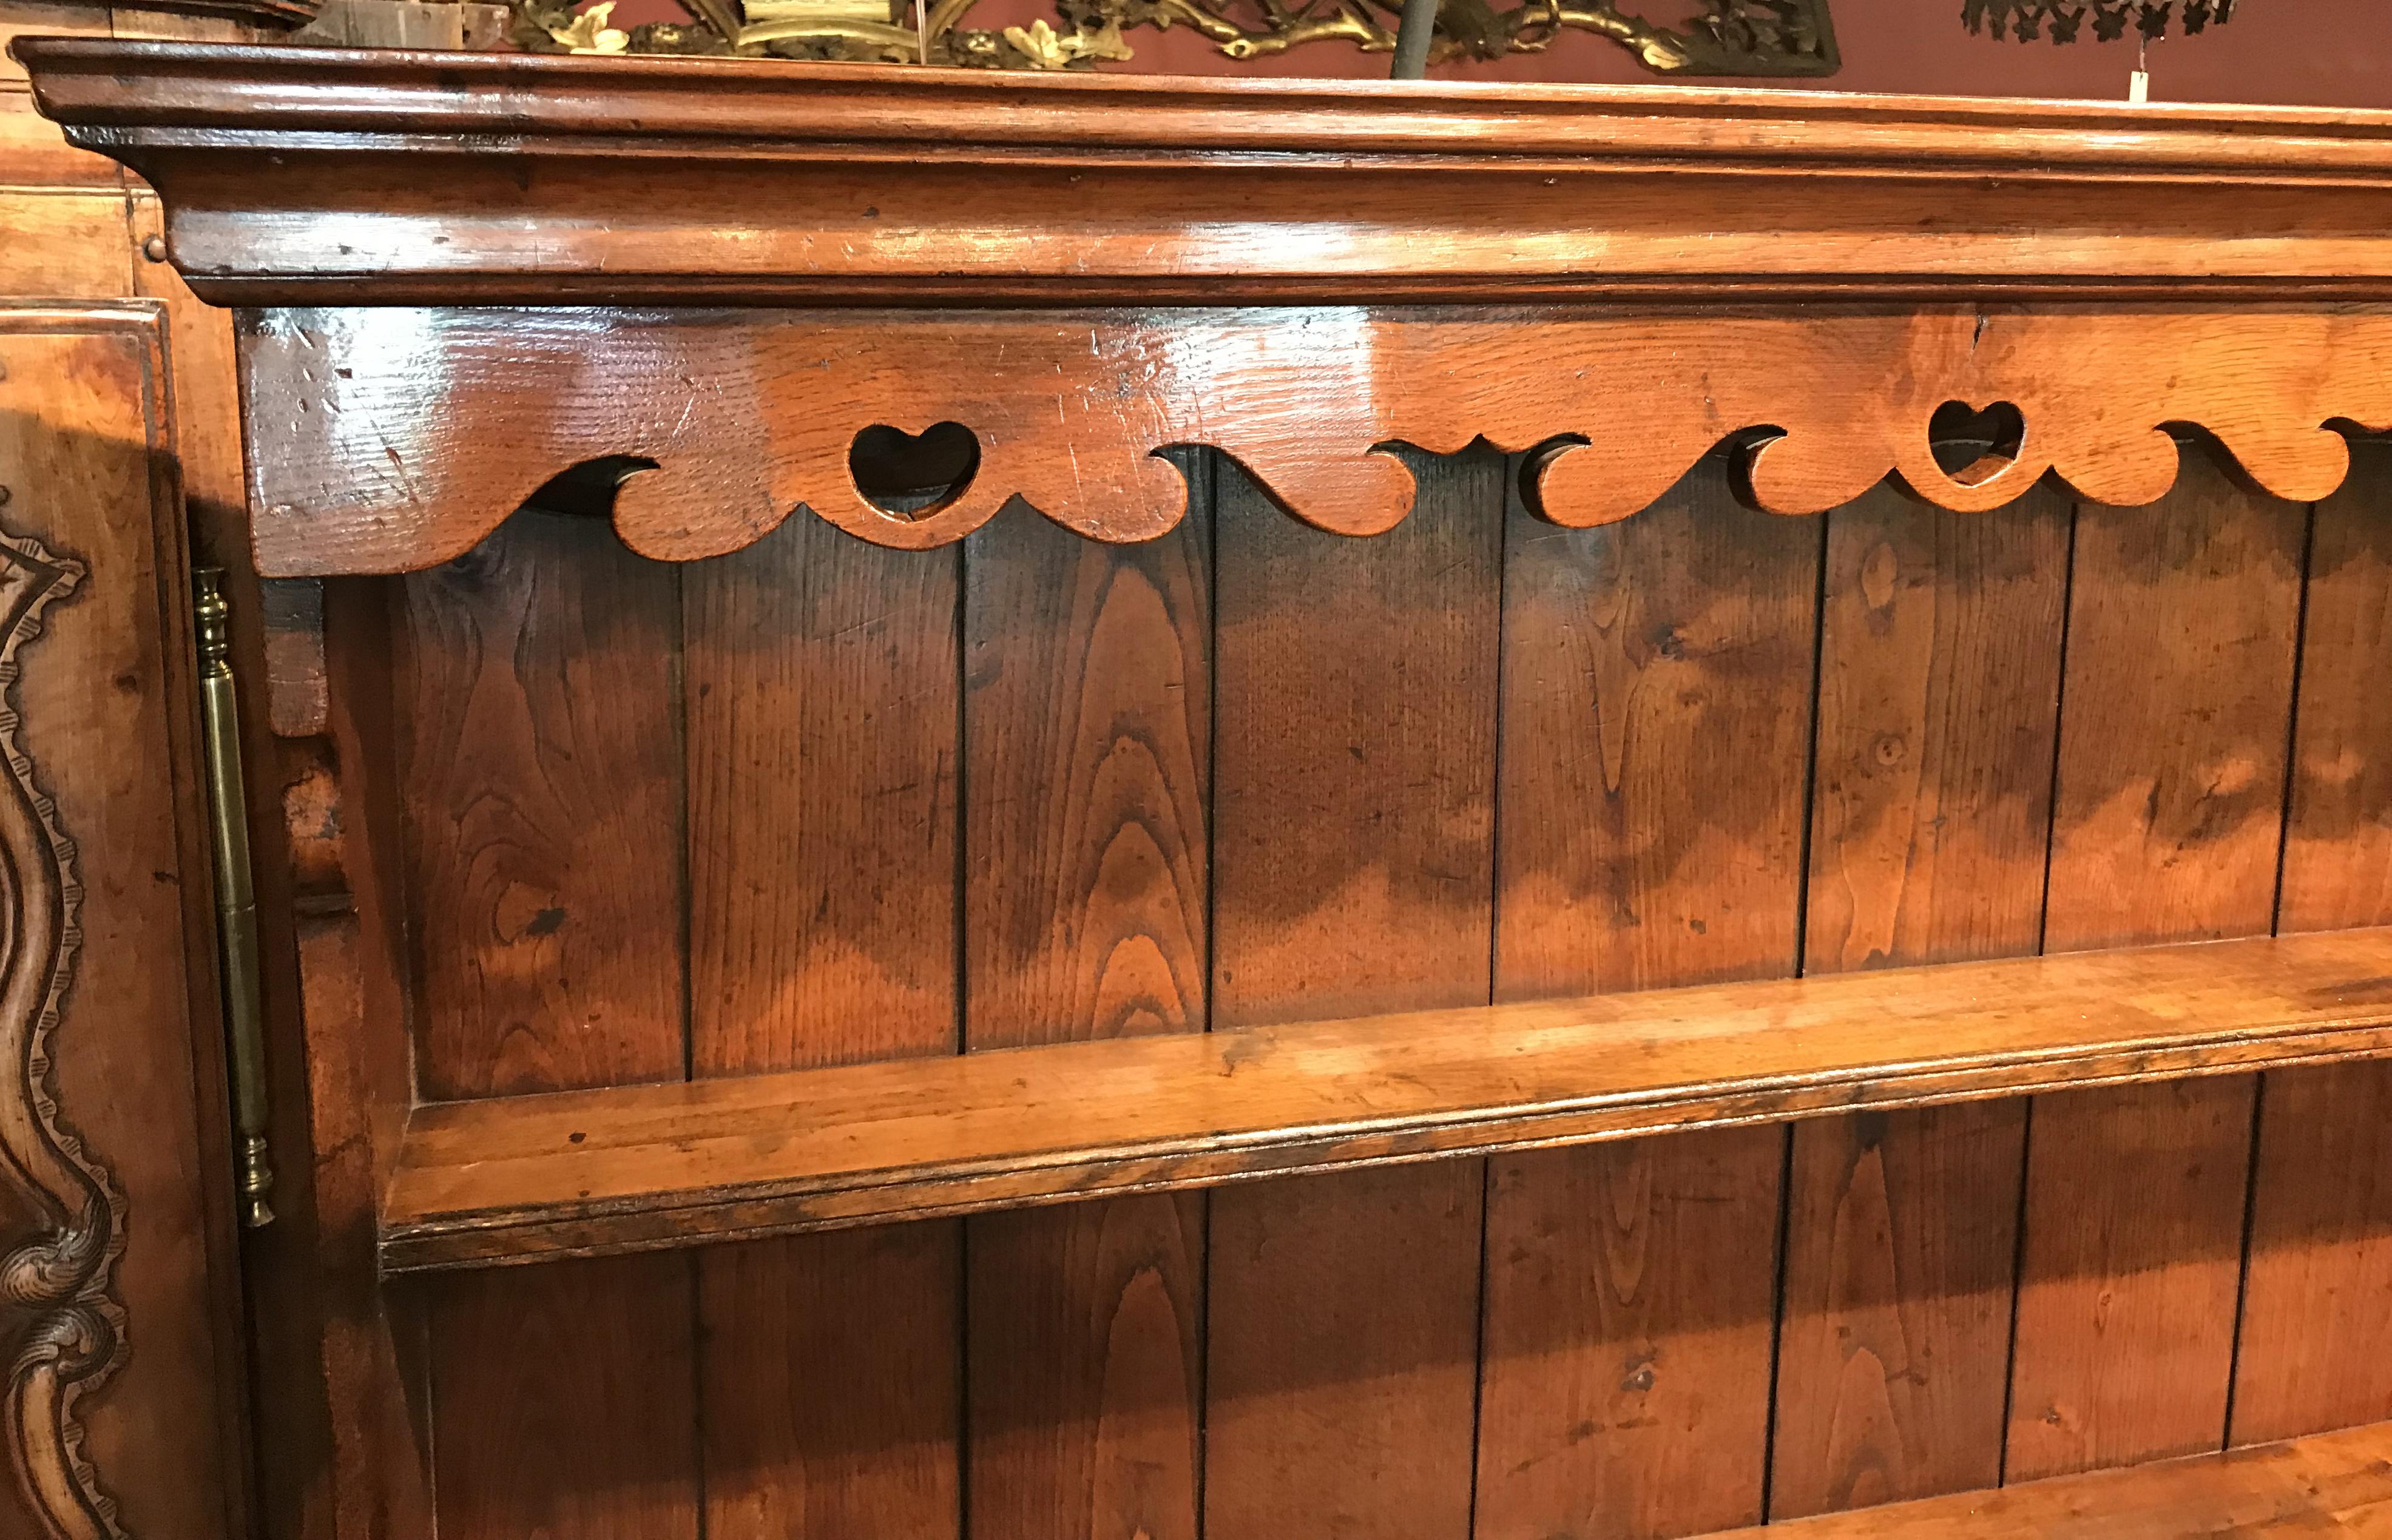 A fine English or Welsh two-part dresser, its upper section with a molded cornice surmounting a nice scroll-carved crown with heart cutouts over two open shelves with plate rails and tongue and grooved backboards, over a row of fitted spice drawers,